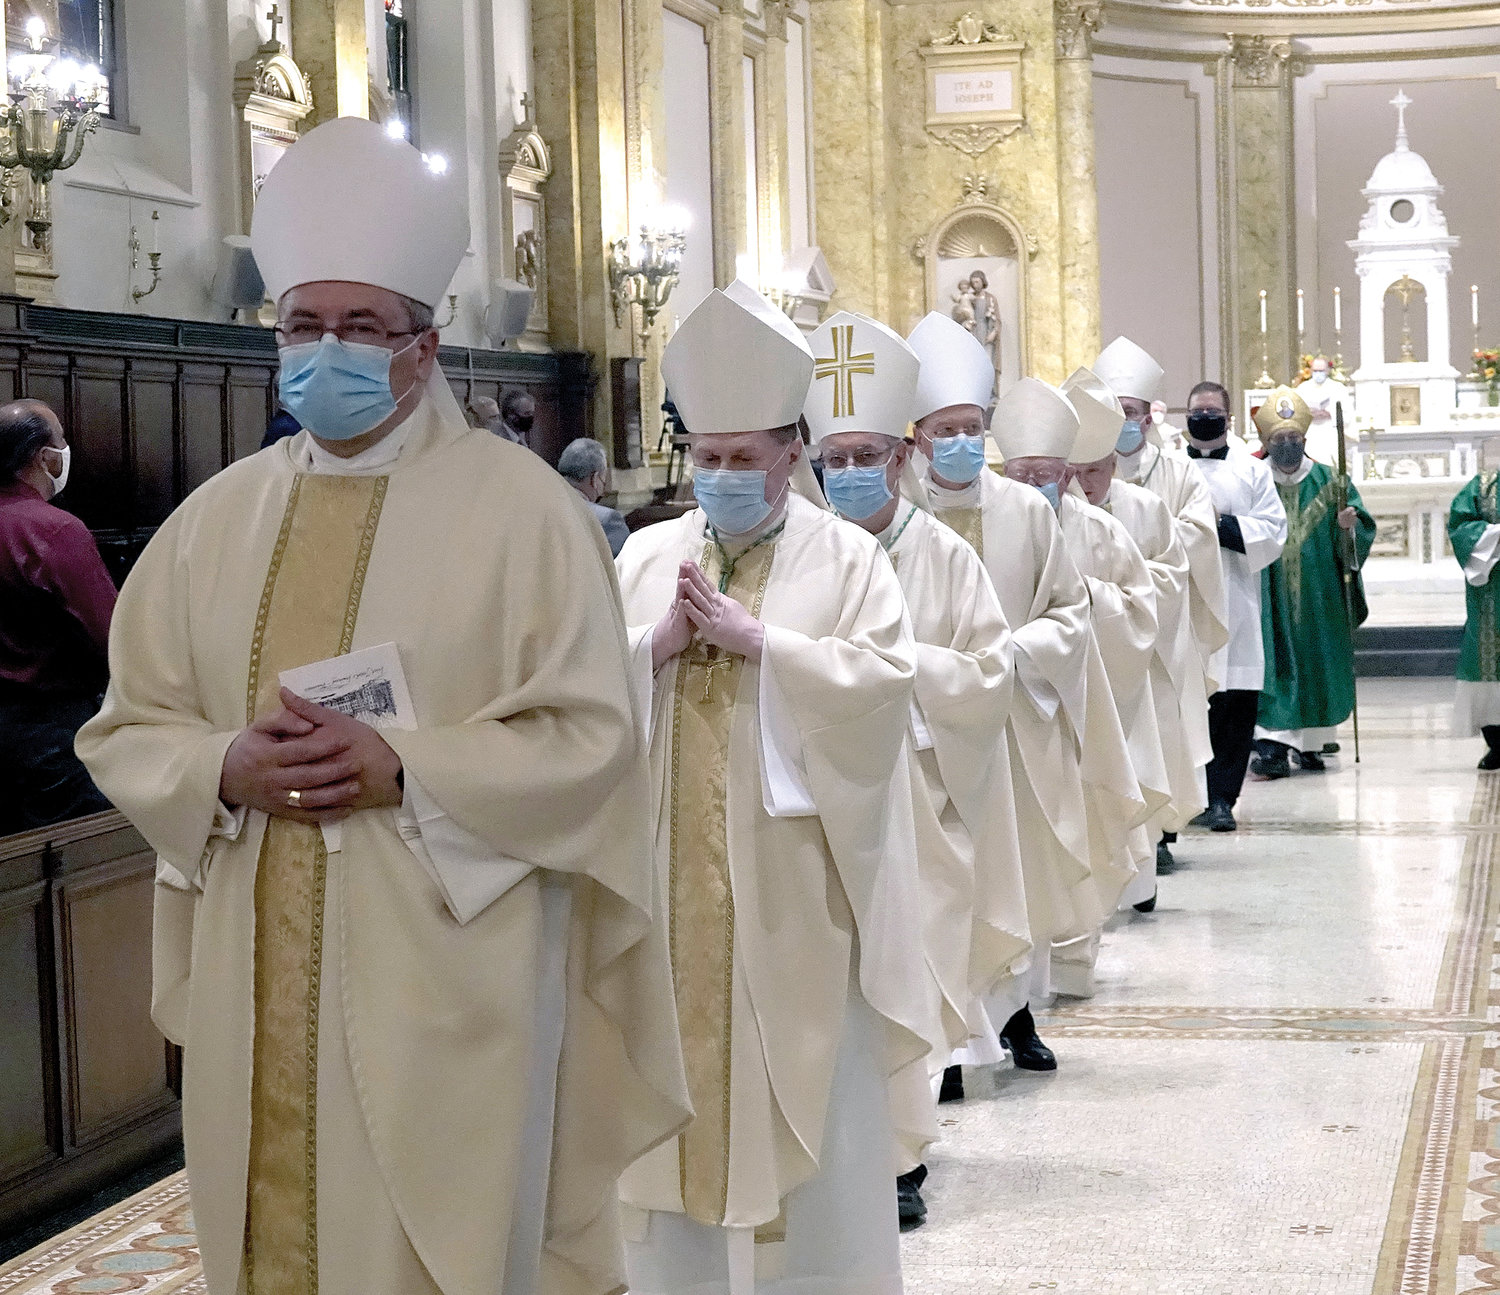 A line of bishops beginning with Auxiliary Bishop Witold Mroziewski of Brooklyn joins the recessional from the seminary chapel after the Mass. Nine prelates were on the altar, including Cardinal Dolan, who presided, and Bishop Nicholas DiMarzio of Brooklyn, the principal celebrant.